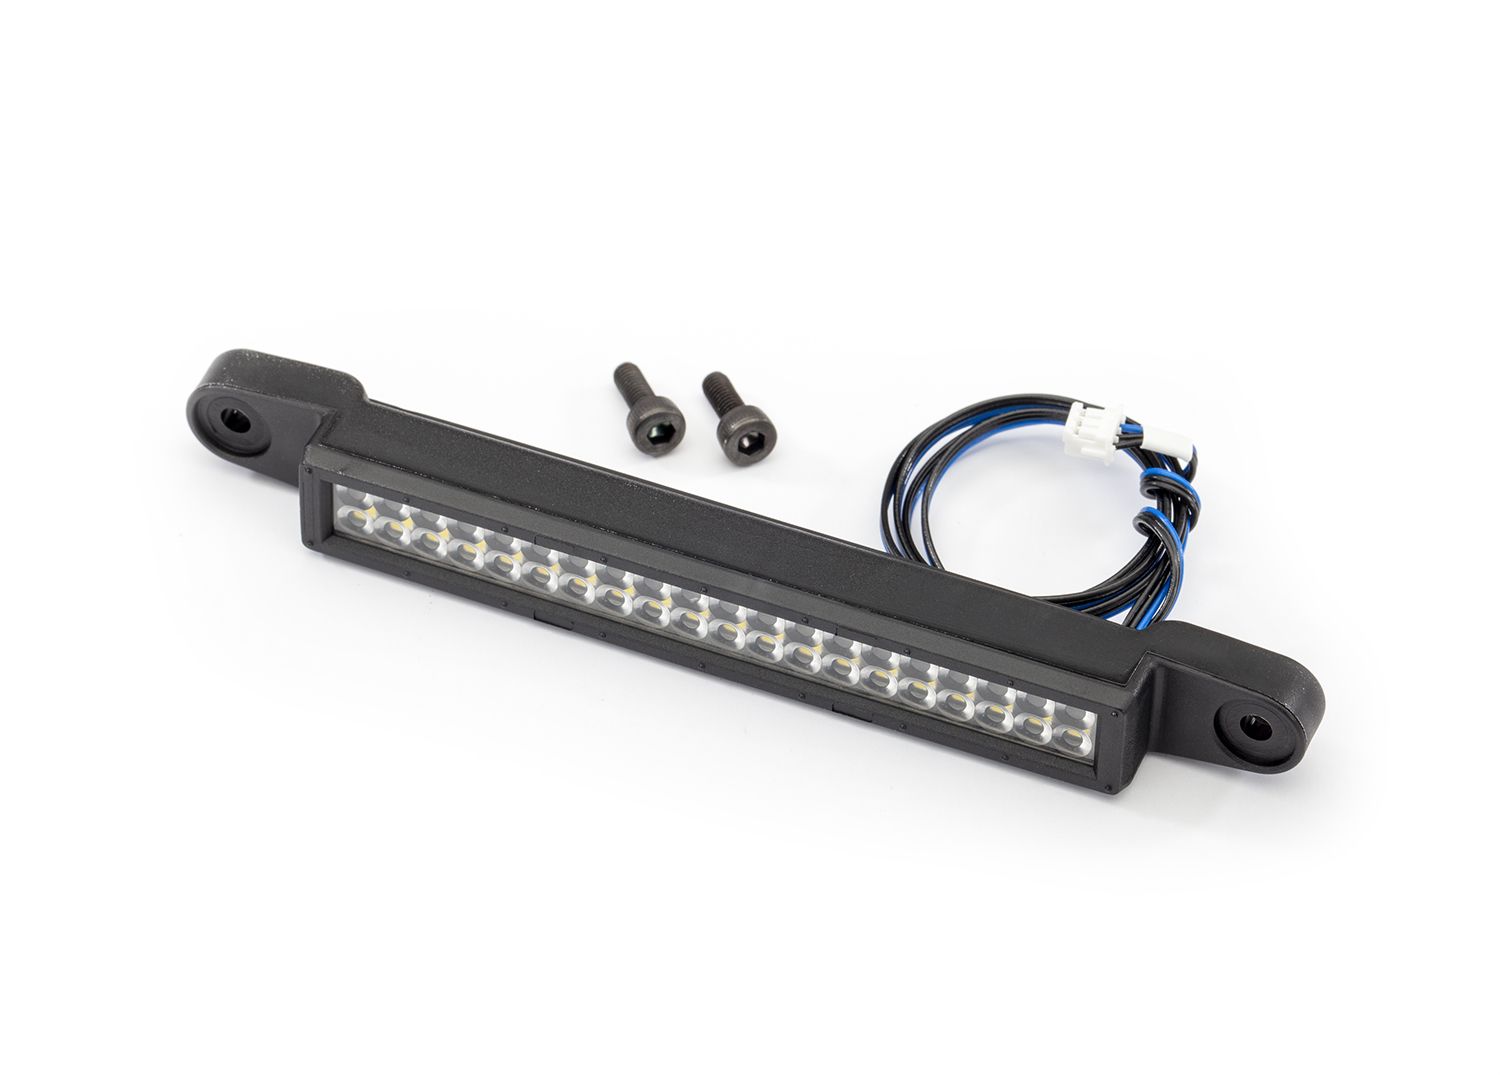 TRAXXAS 7884 LED light bar, front high-voltage 40 white LEDs double row, 82mm wide fits X-Maxx® or Maxx®